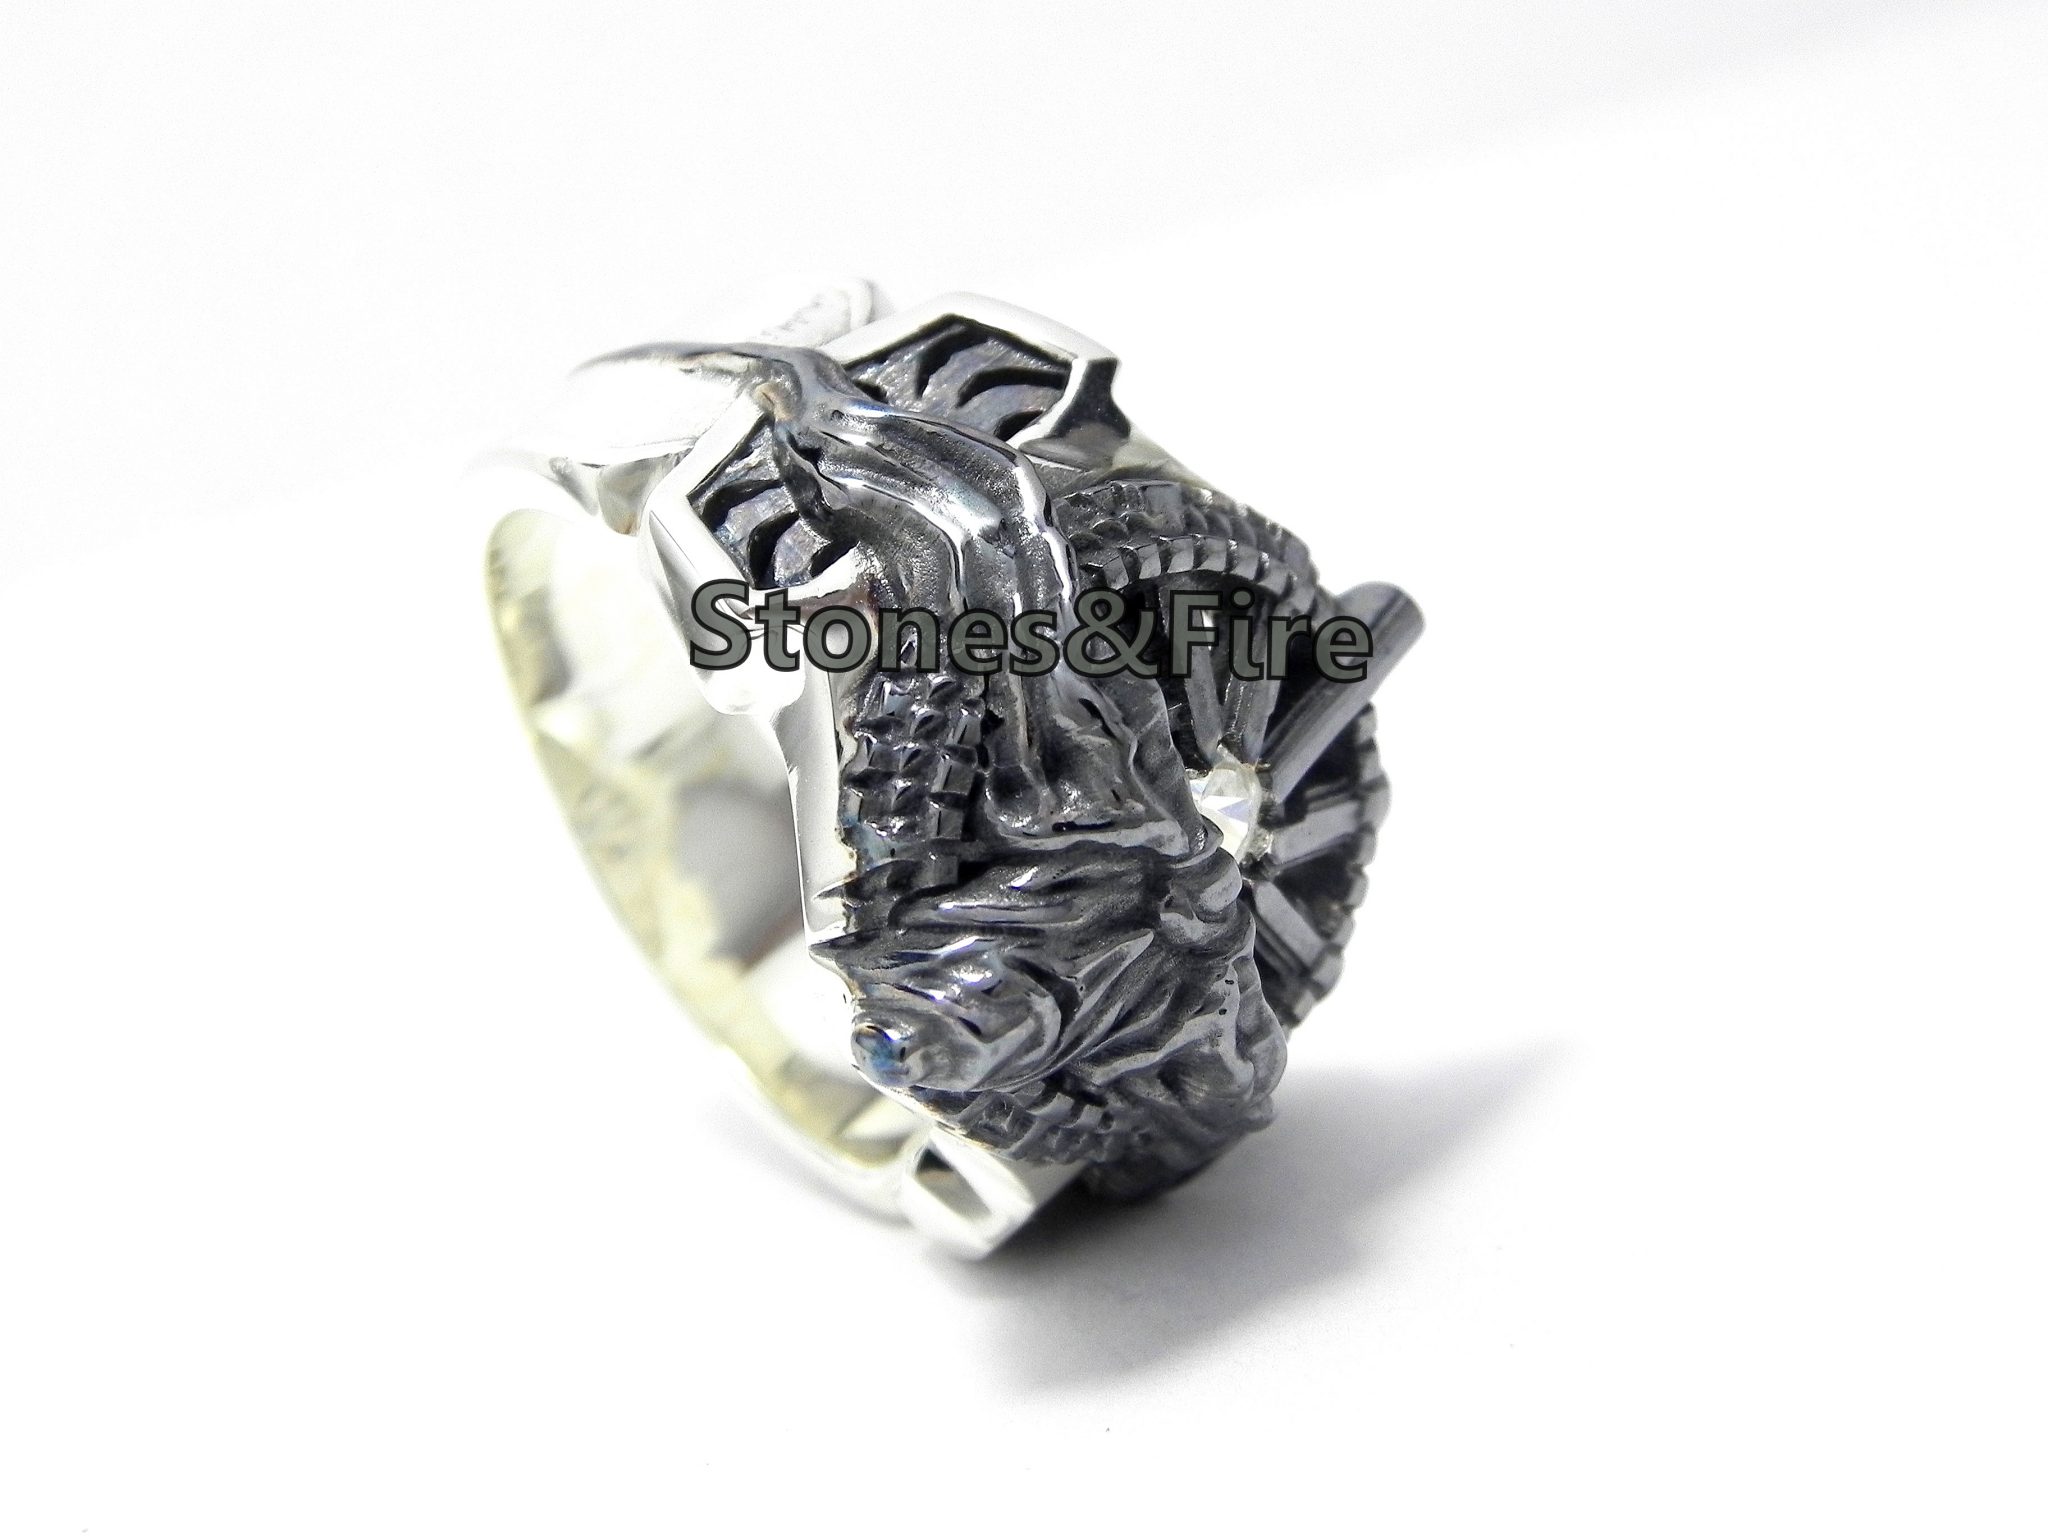 Begin Bitterheid patroon Ring of Lucii-Final Fantasy XV-Noctis Lucis Caelum Massive Ring-Cosplayer-FF  Cosplay-Final Fantasy 15 Gift accessories-geeky nerdy gifts-CREATES TO  ORDER • Stones&Fire